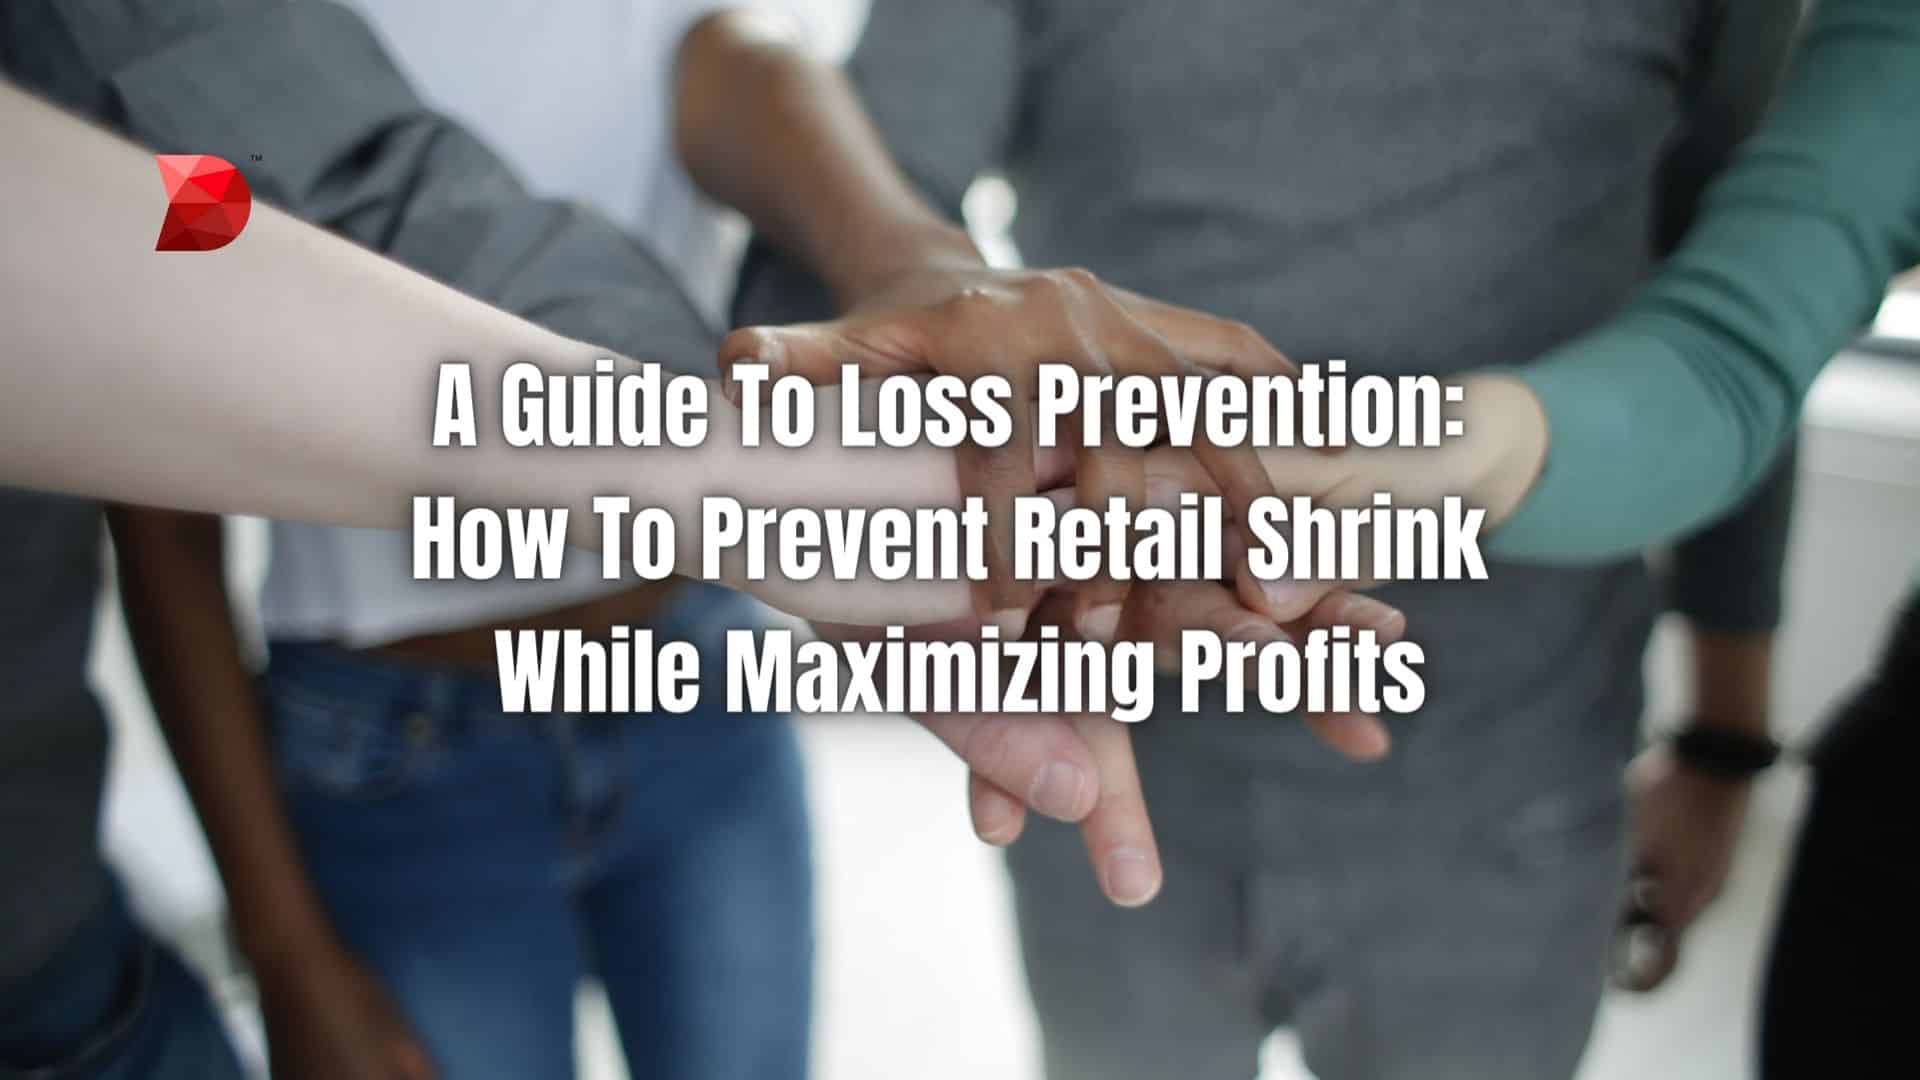 A Guide To Loss Prevention How To Prevent Retail Shrink While Maximizing Profits